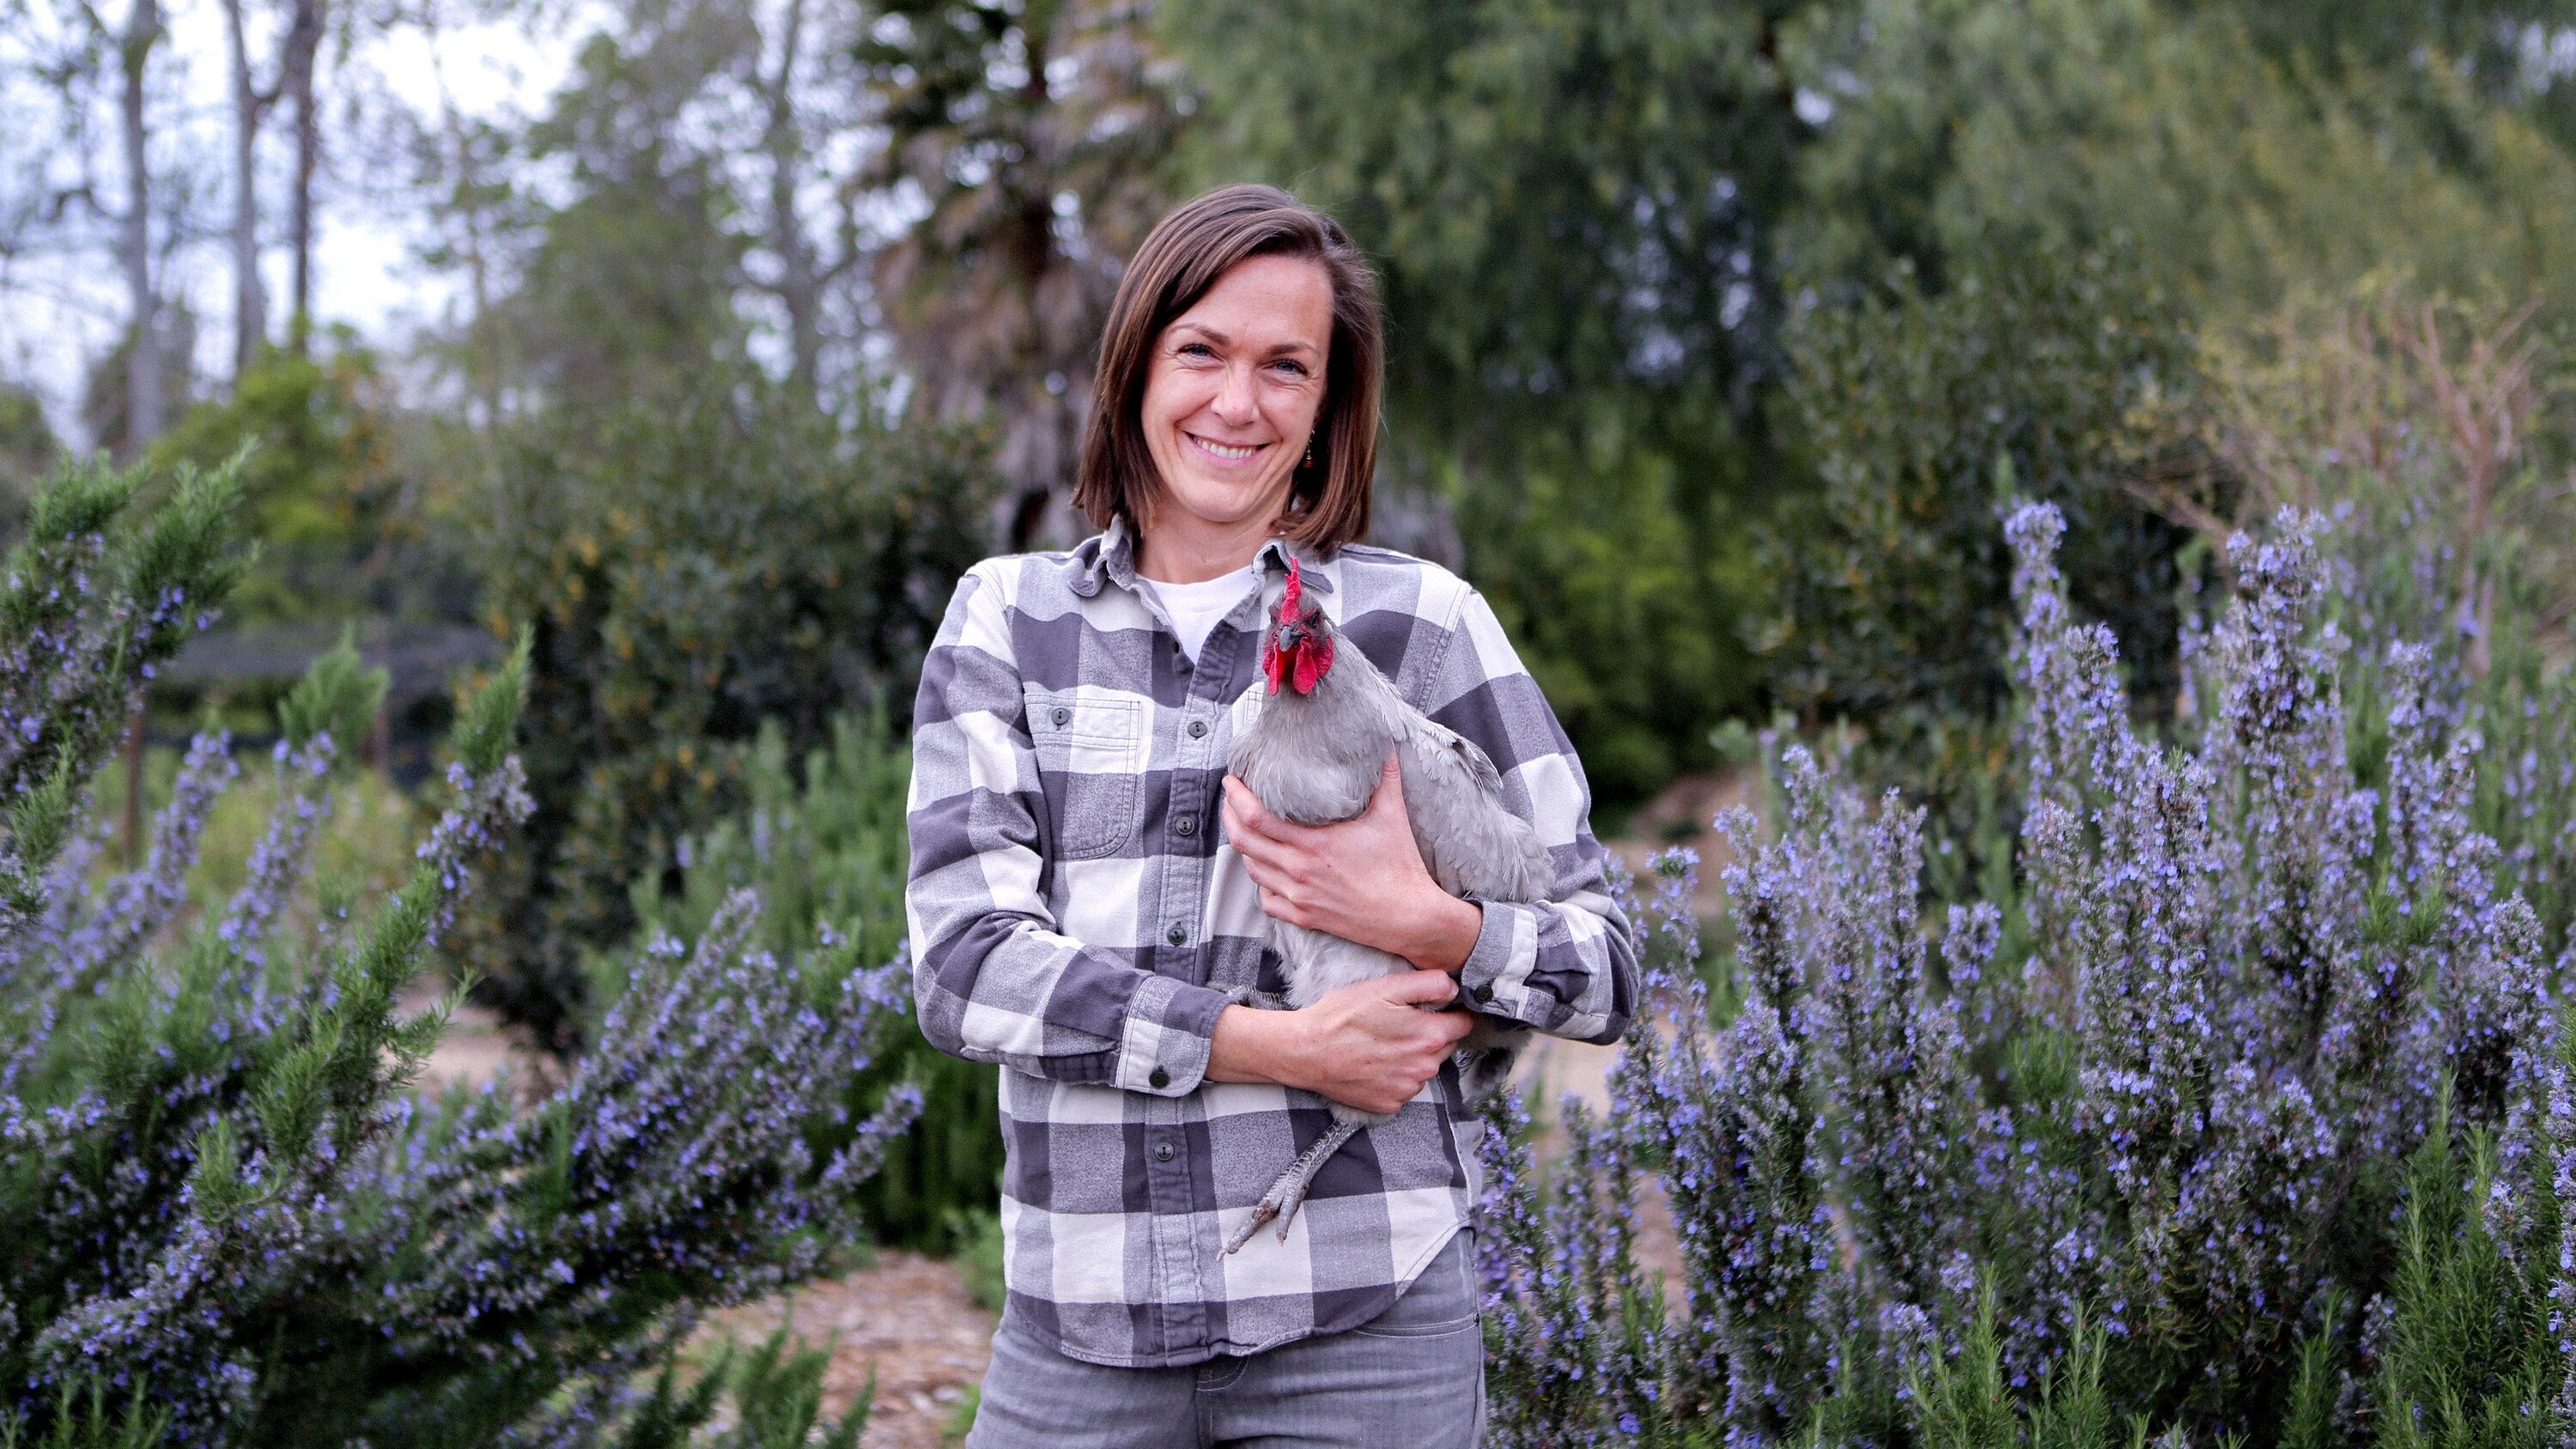 Molly Chester co-founded Apricot Lane Farms with her husband John with the intention of rebuilding a healthy farm ecosystem on a neglected lemon farm in Southern California. (Apricot Lane Farms/Yvette Roman)